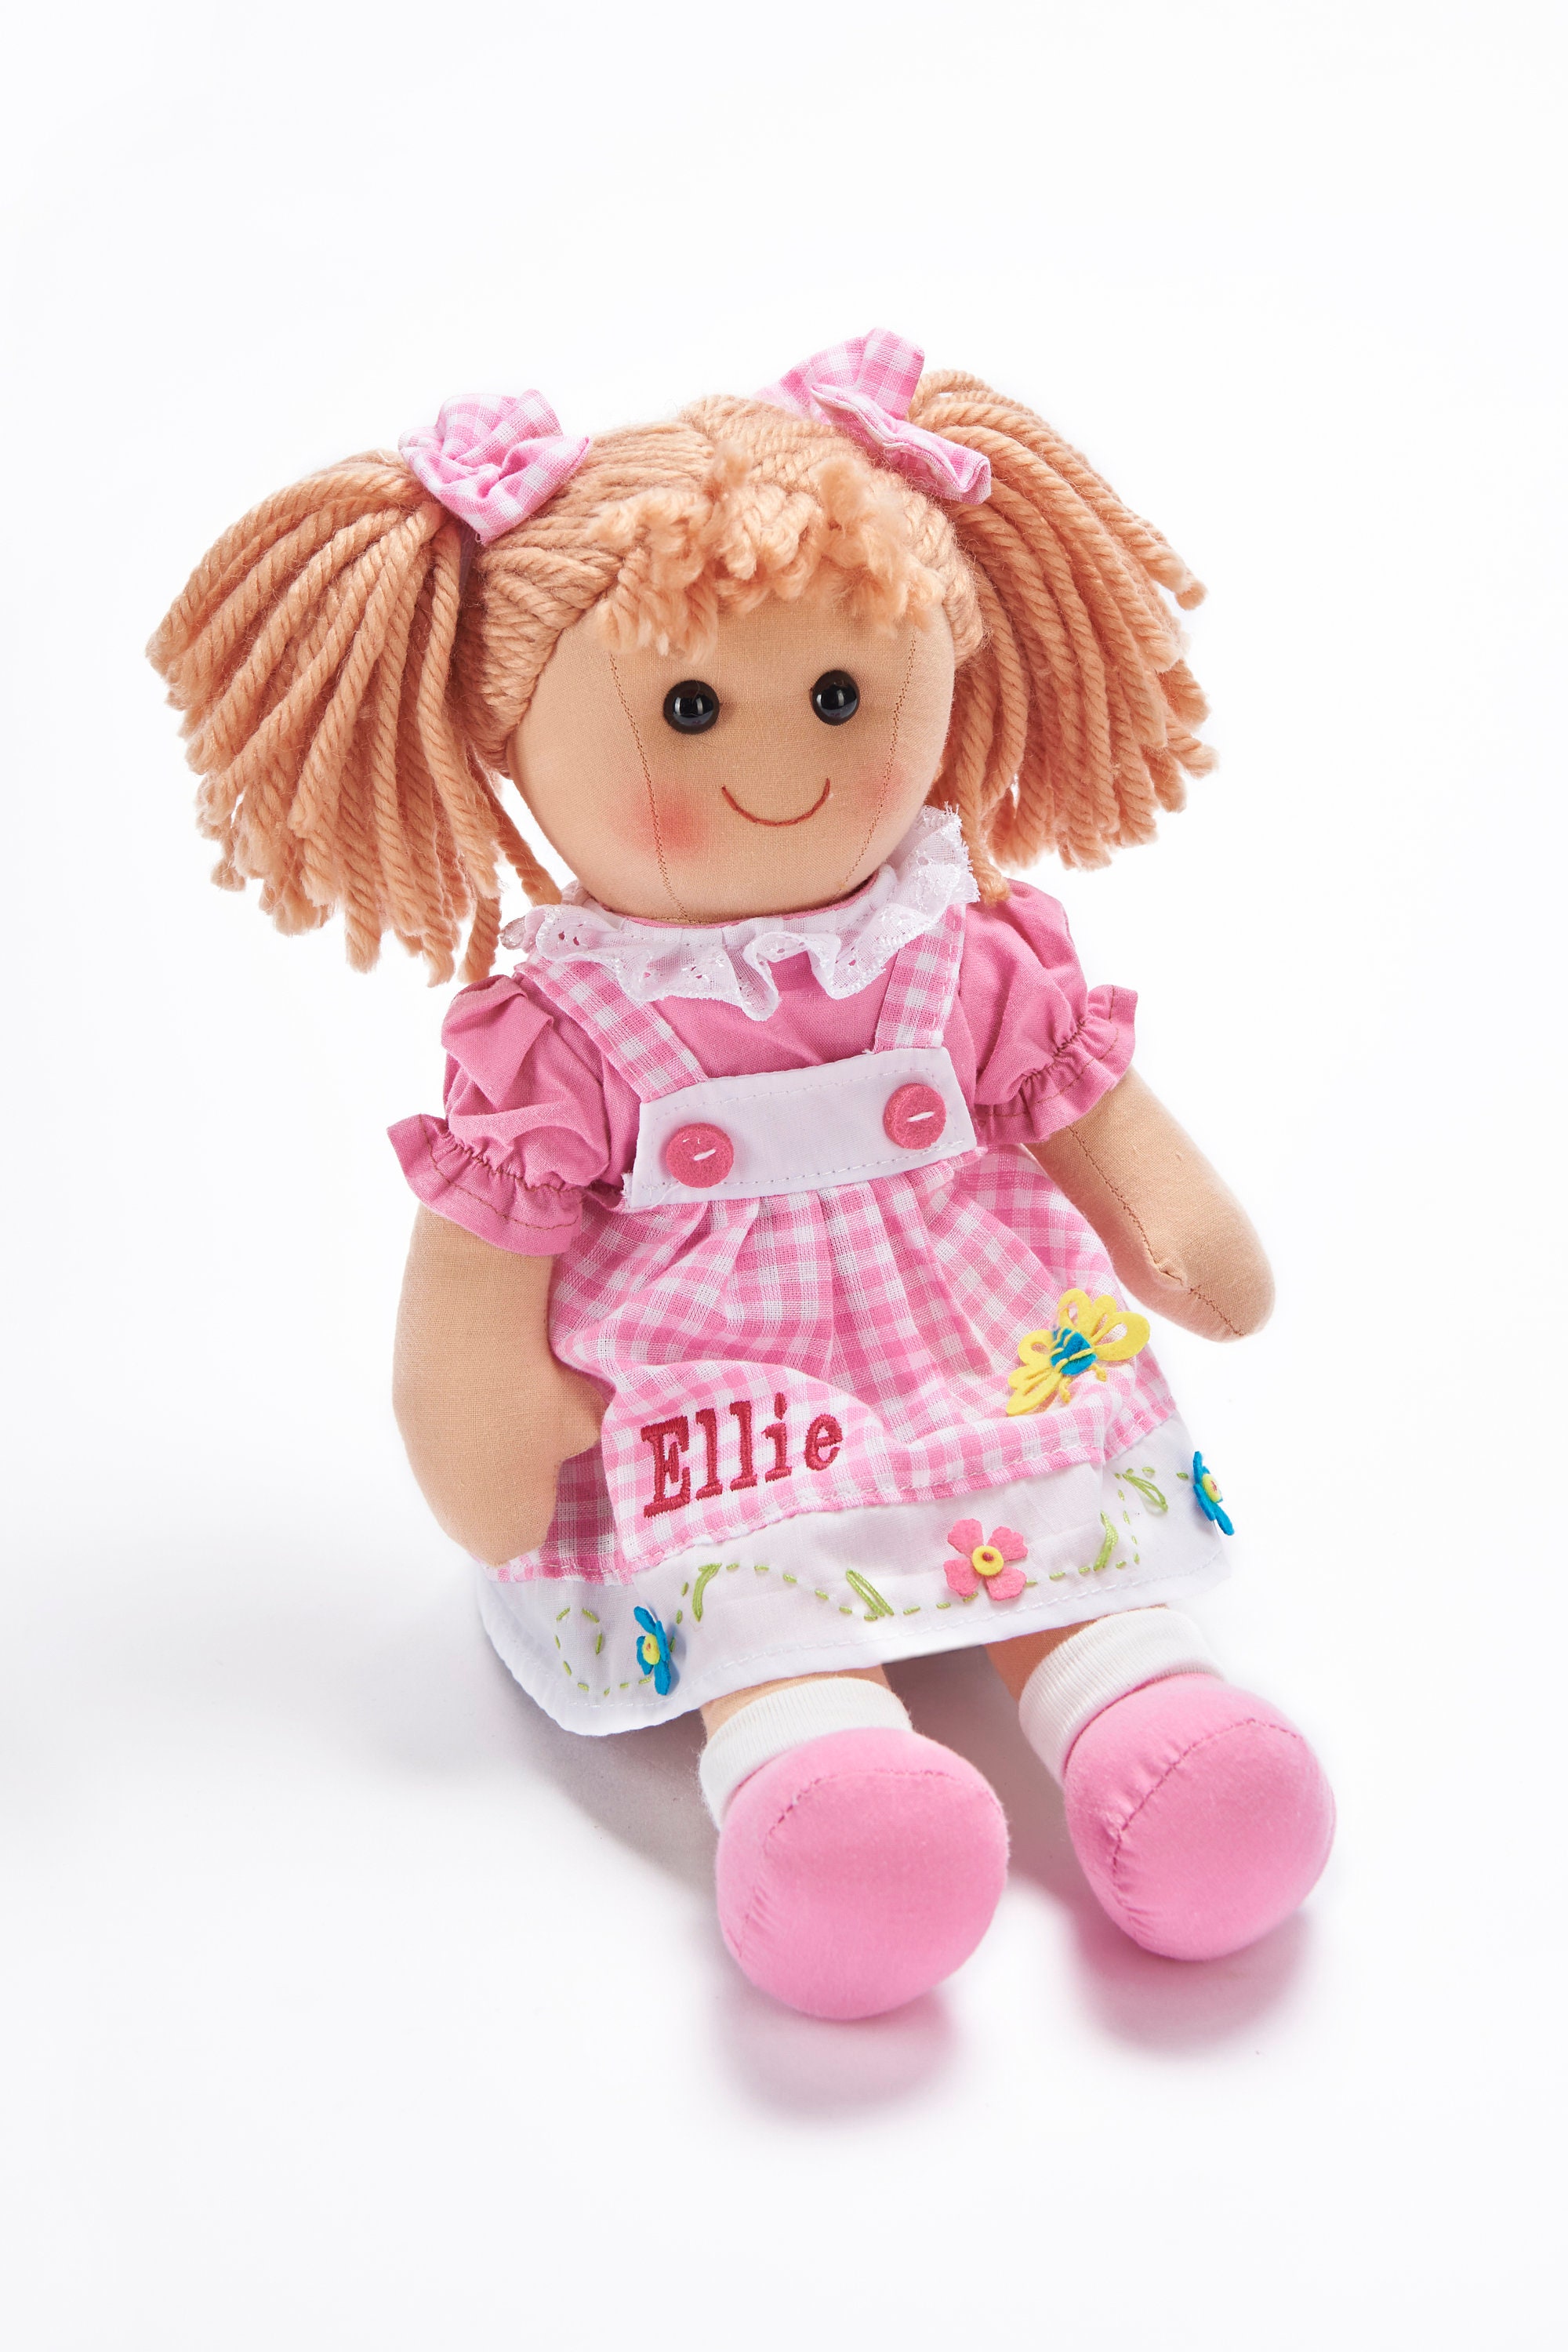 Personalised Rag Doll, My First Soft Baby Doll Toy, Girls Gingham Pink  Embroidered Traditional Doll Gift, Customised 1 Year Old Rag Doll -   Canada